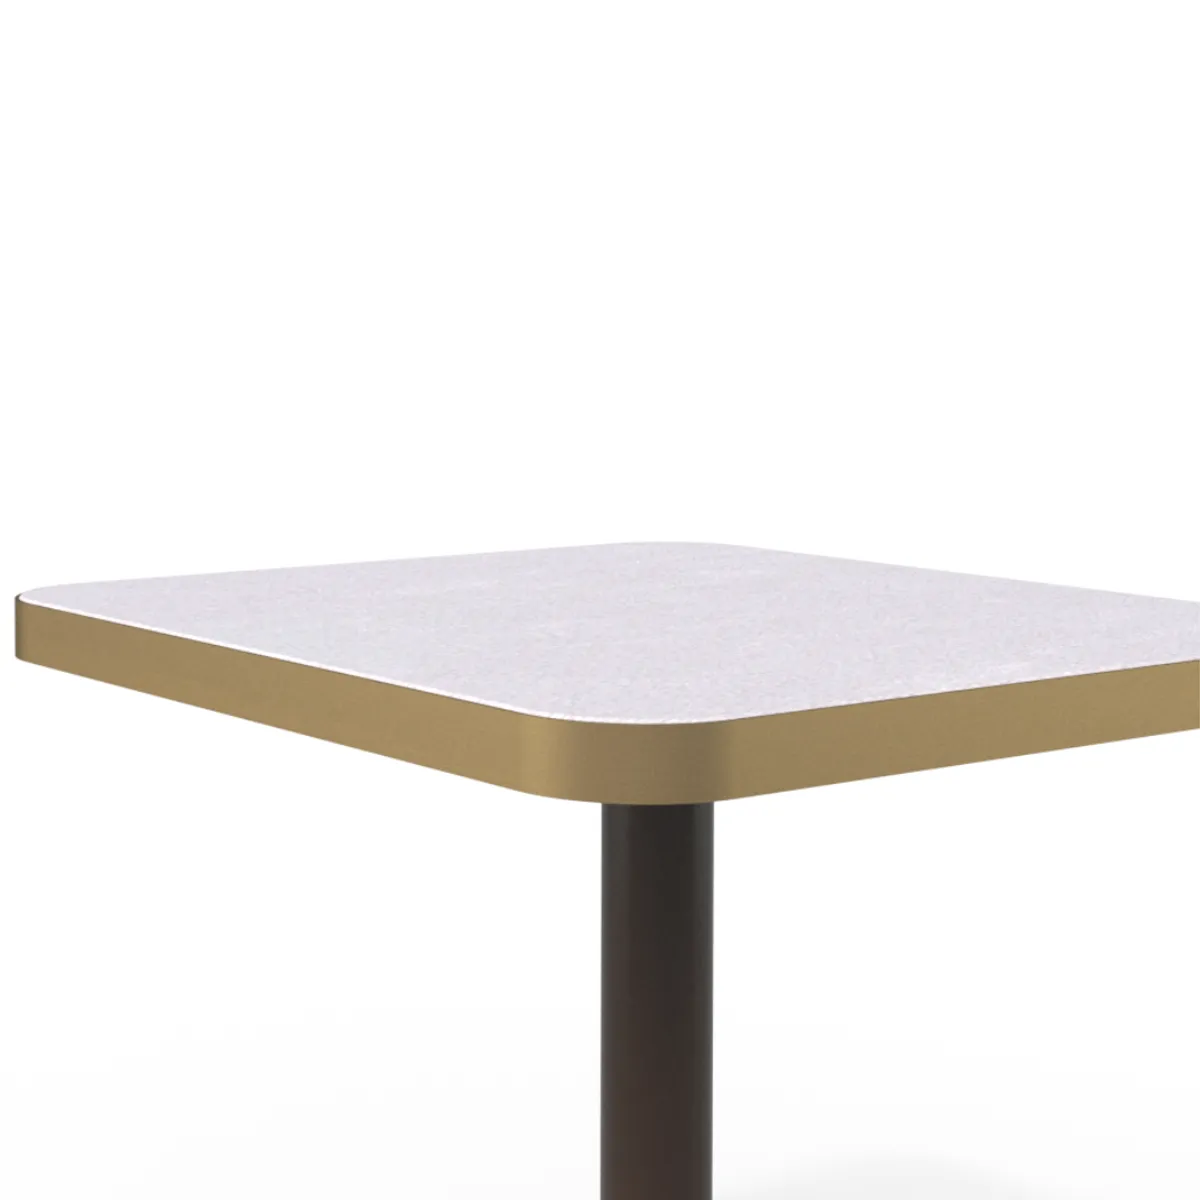 Gouqi square dining table 4